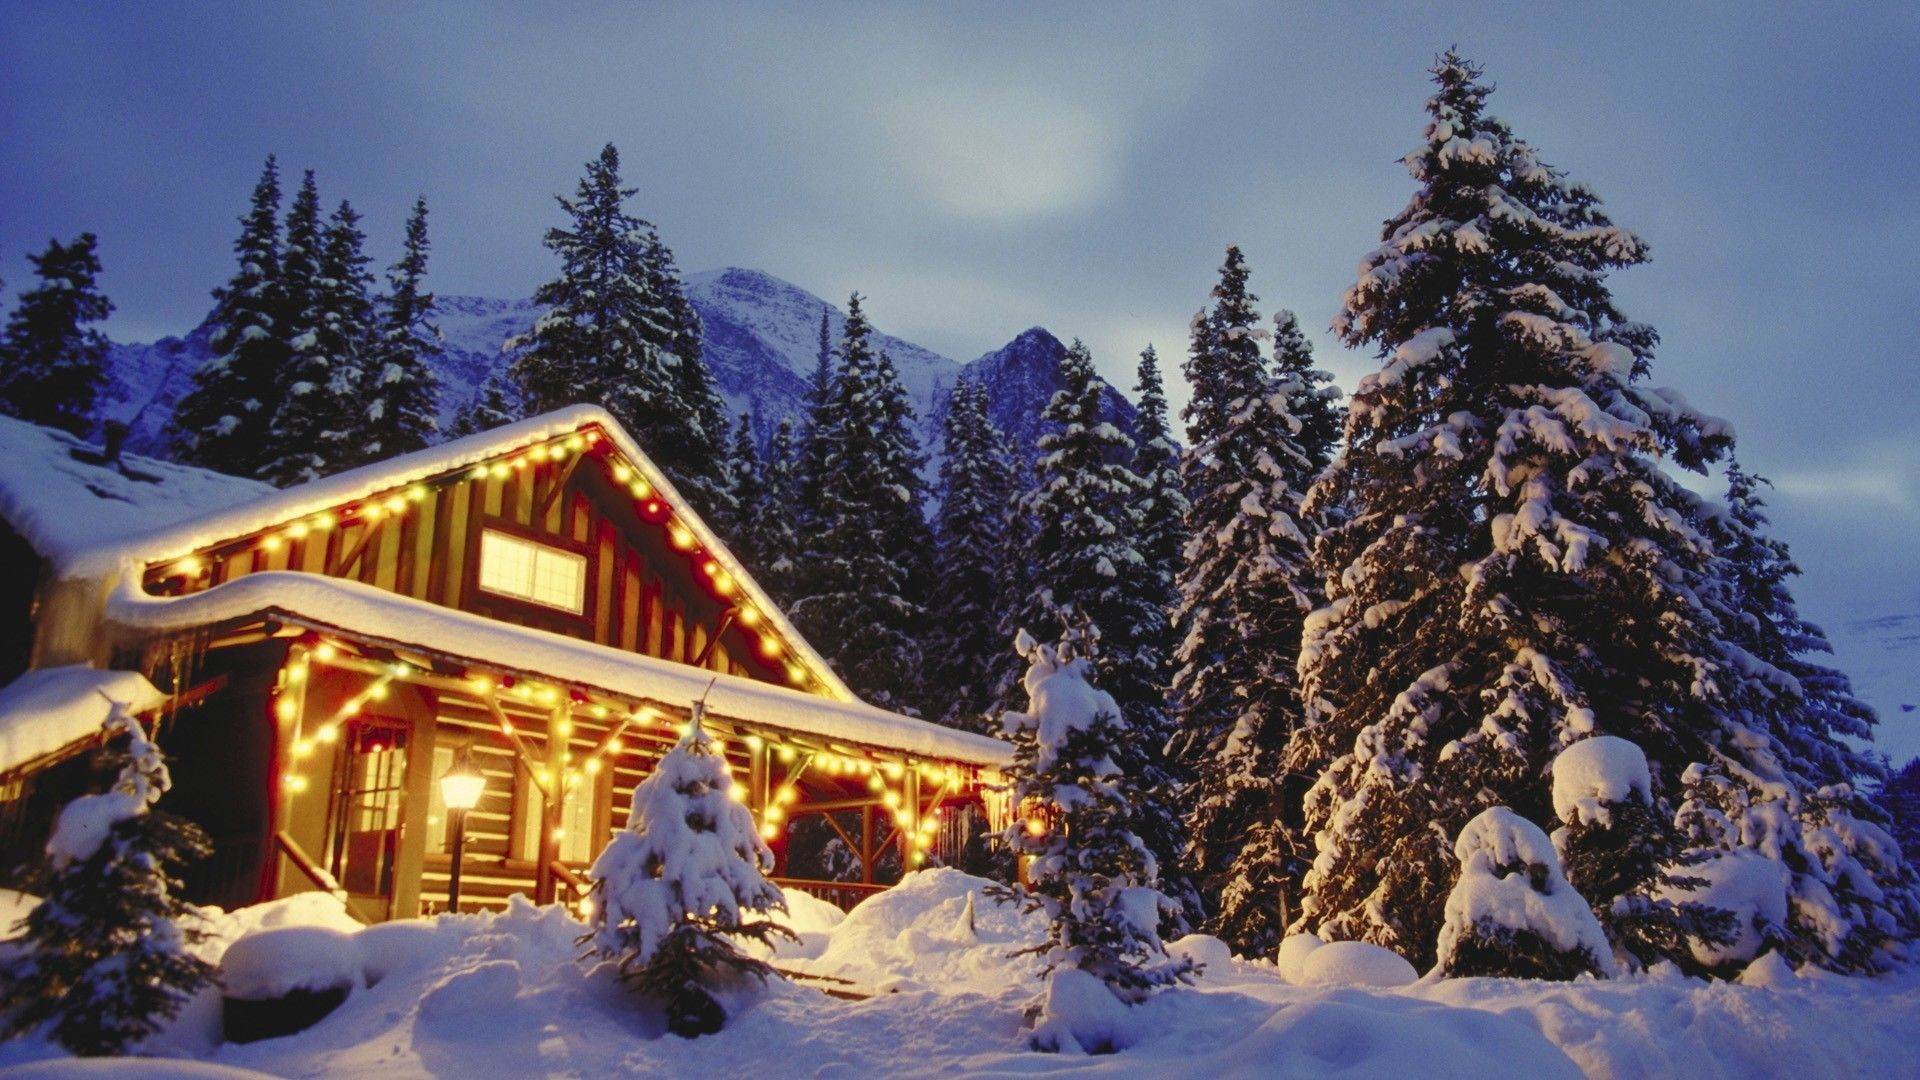 1920x1080 Christmas Cabin Wallpapers Top Free Christmas Cabin Backgrounds